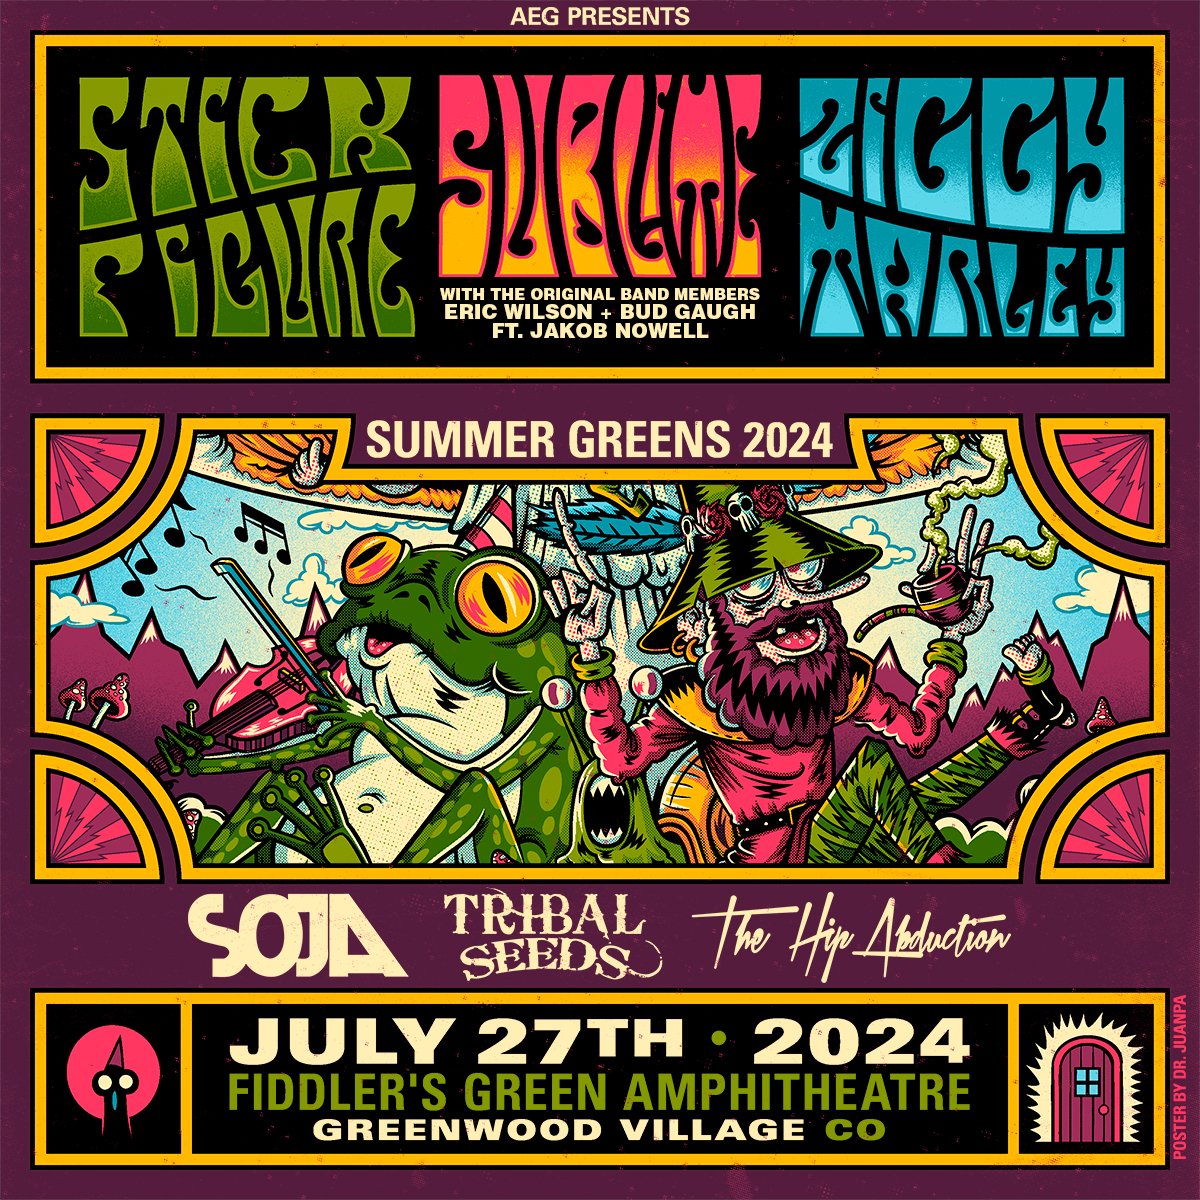 We’re joining forces with our friends @sublime & @ziggymarley, along with @SOJALive, @TribalSeeds & @thehipabduction in Denver on Saturday, July 27th at Fiddler’s Green Amphitheatre. It’s gonna be a party! Limited fan club presale tickets available now using code SACREDSANDS.